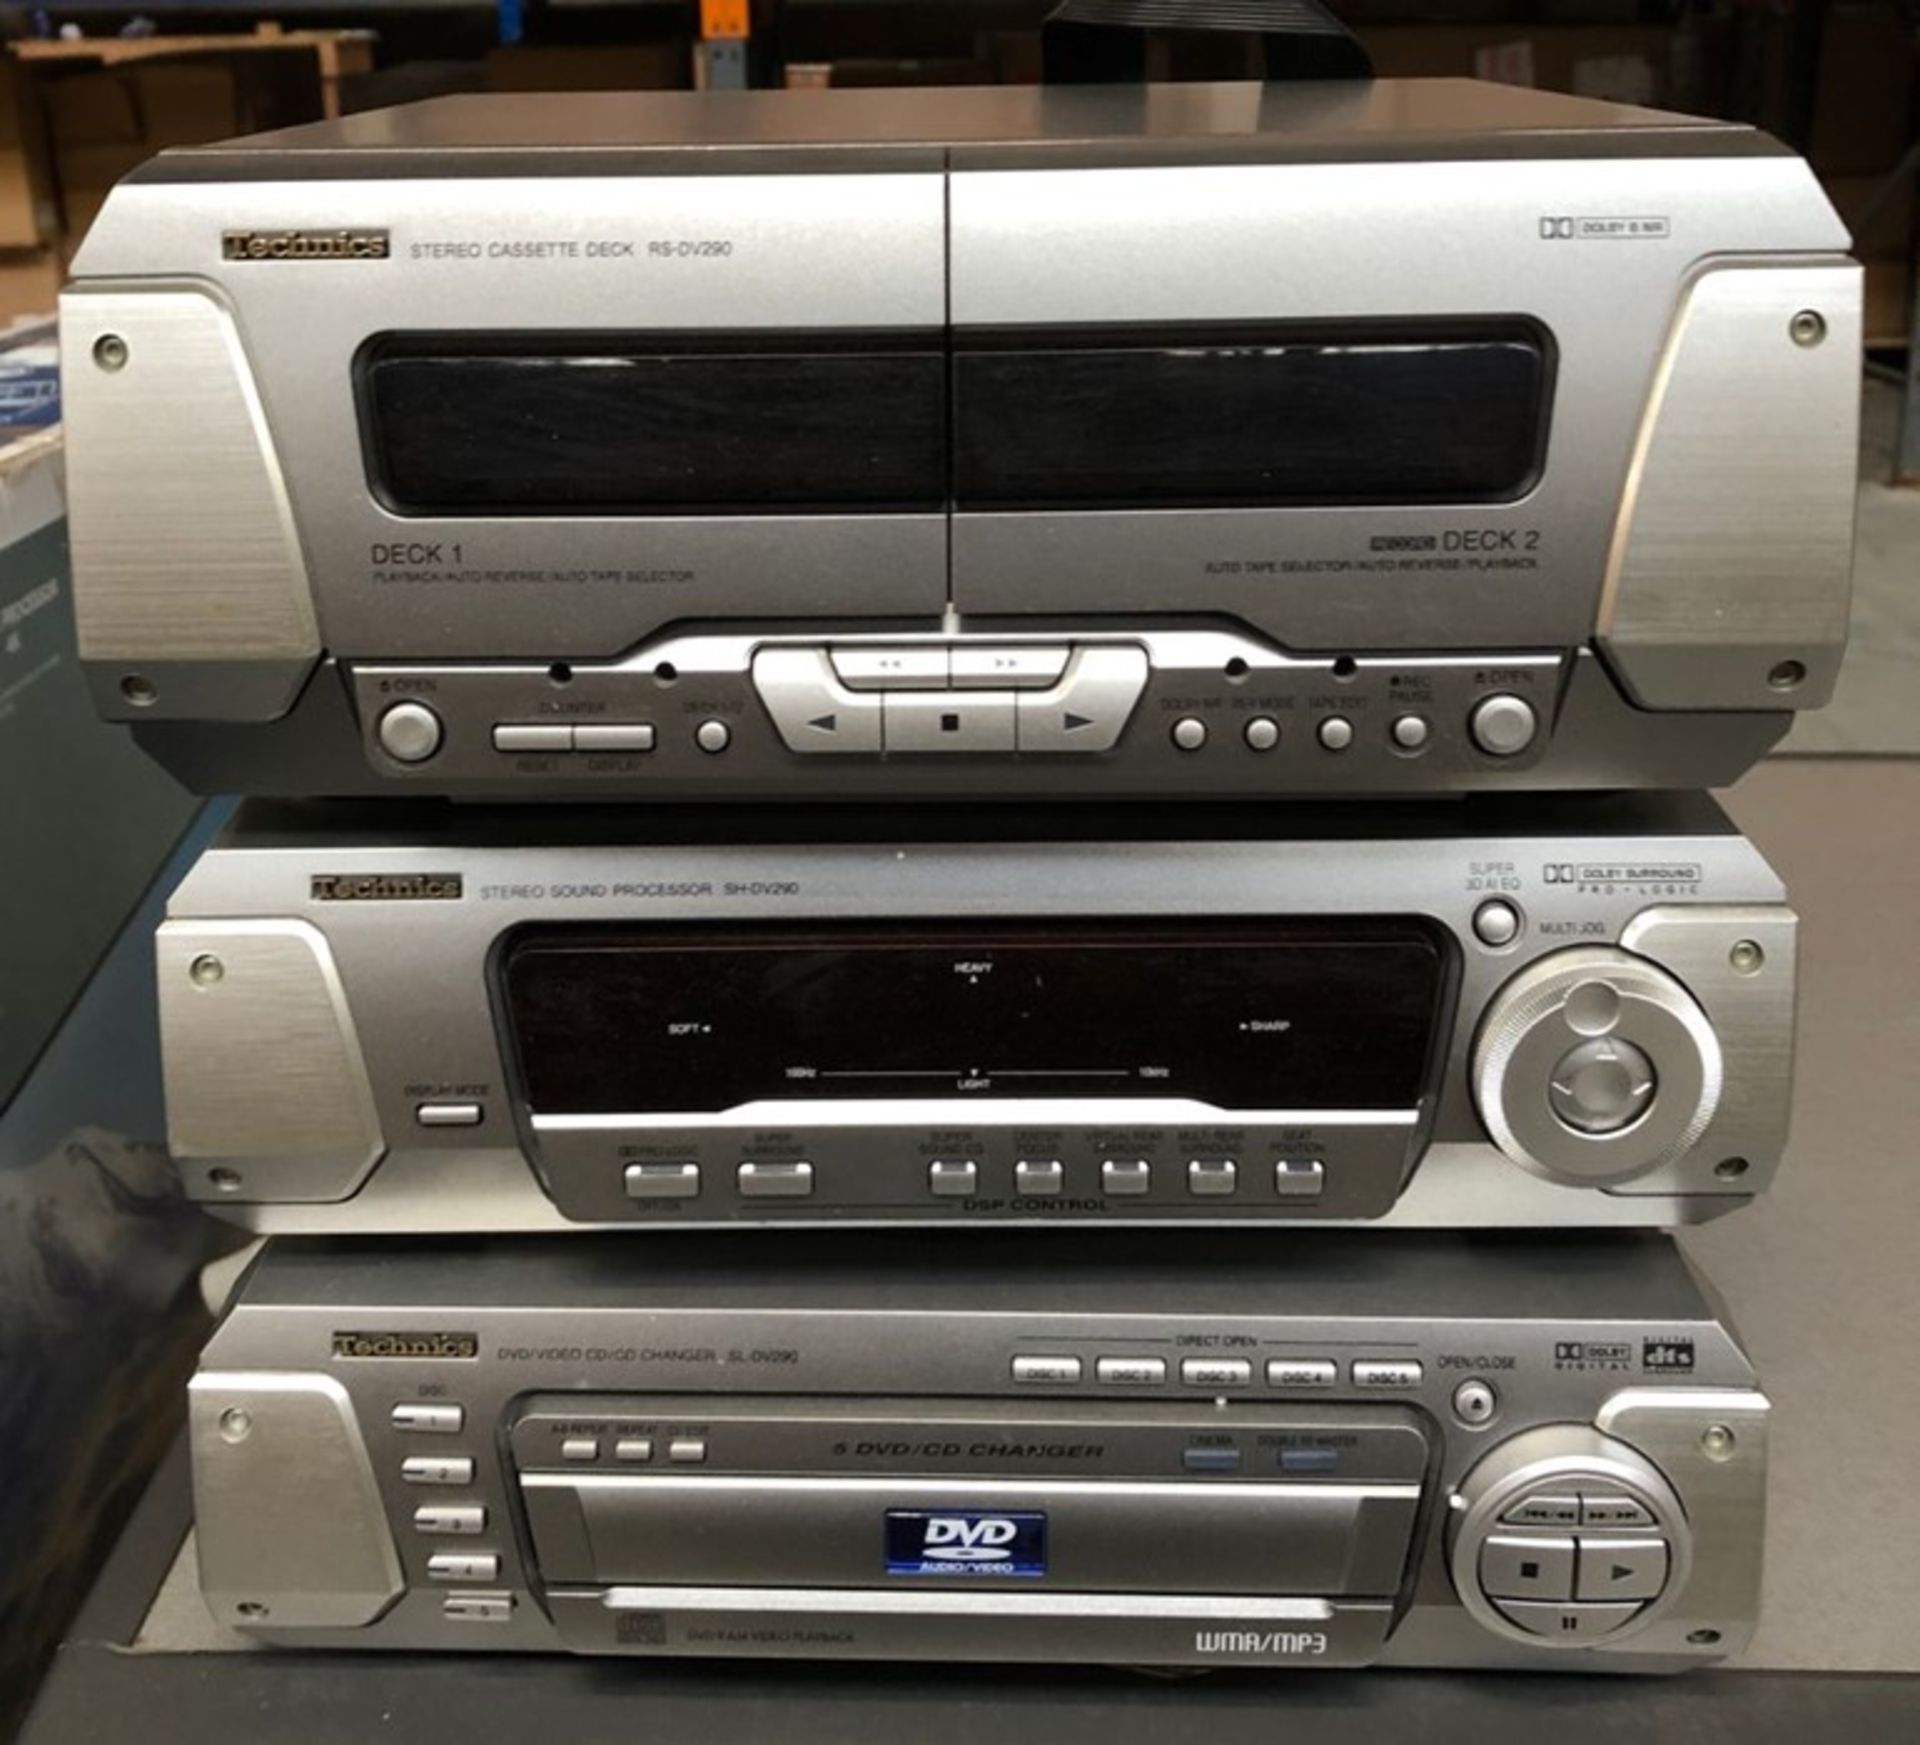 3 X TECHNICS ELECTRONIC PRODUCTS / INCLUDING: 1 X CD/DVD PLAYER, 1 X STEREO SYSTEM AND 1 X